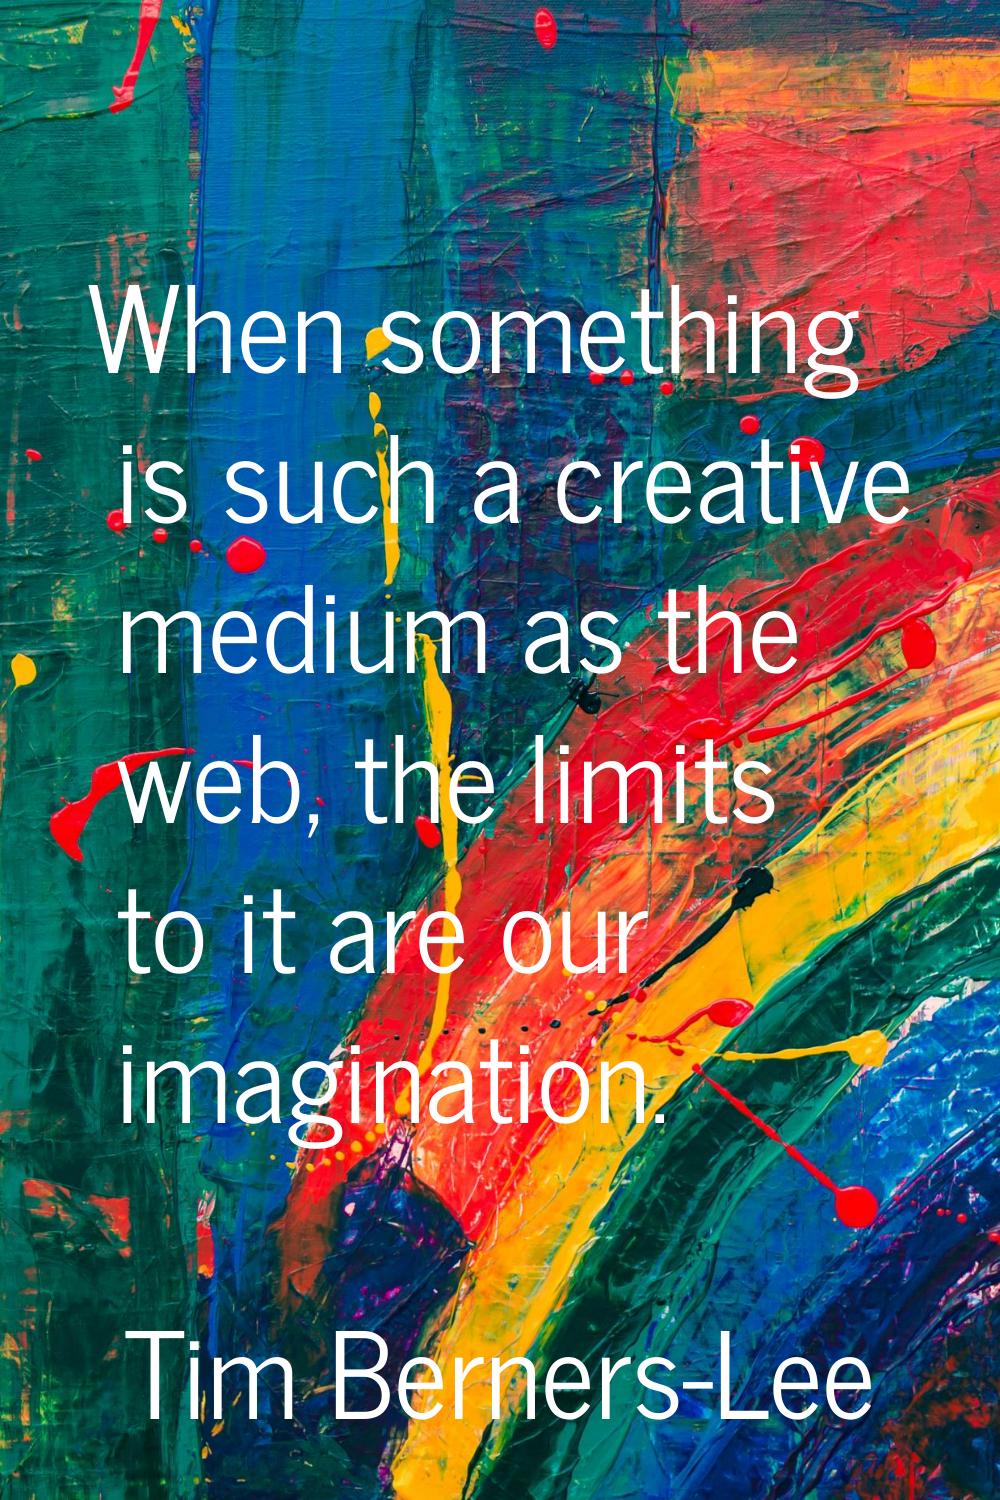 When something is such a creative medium as the web, the limits to it are our imagination.